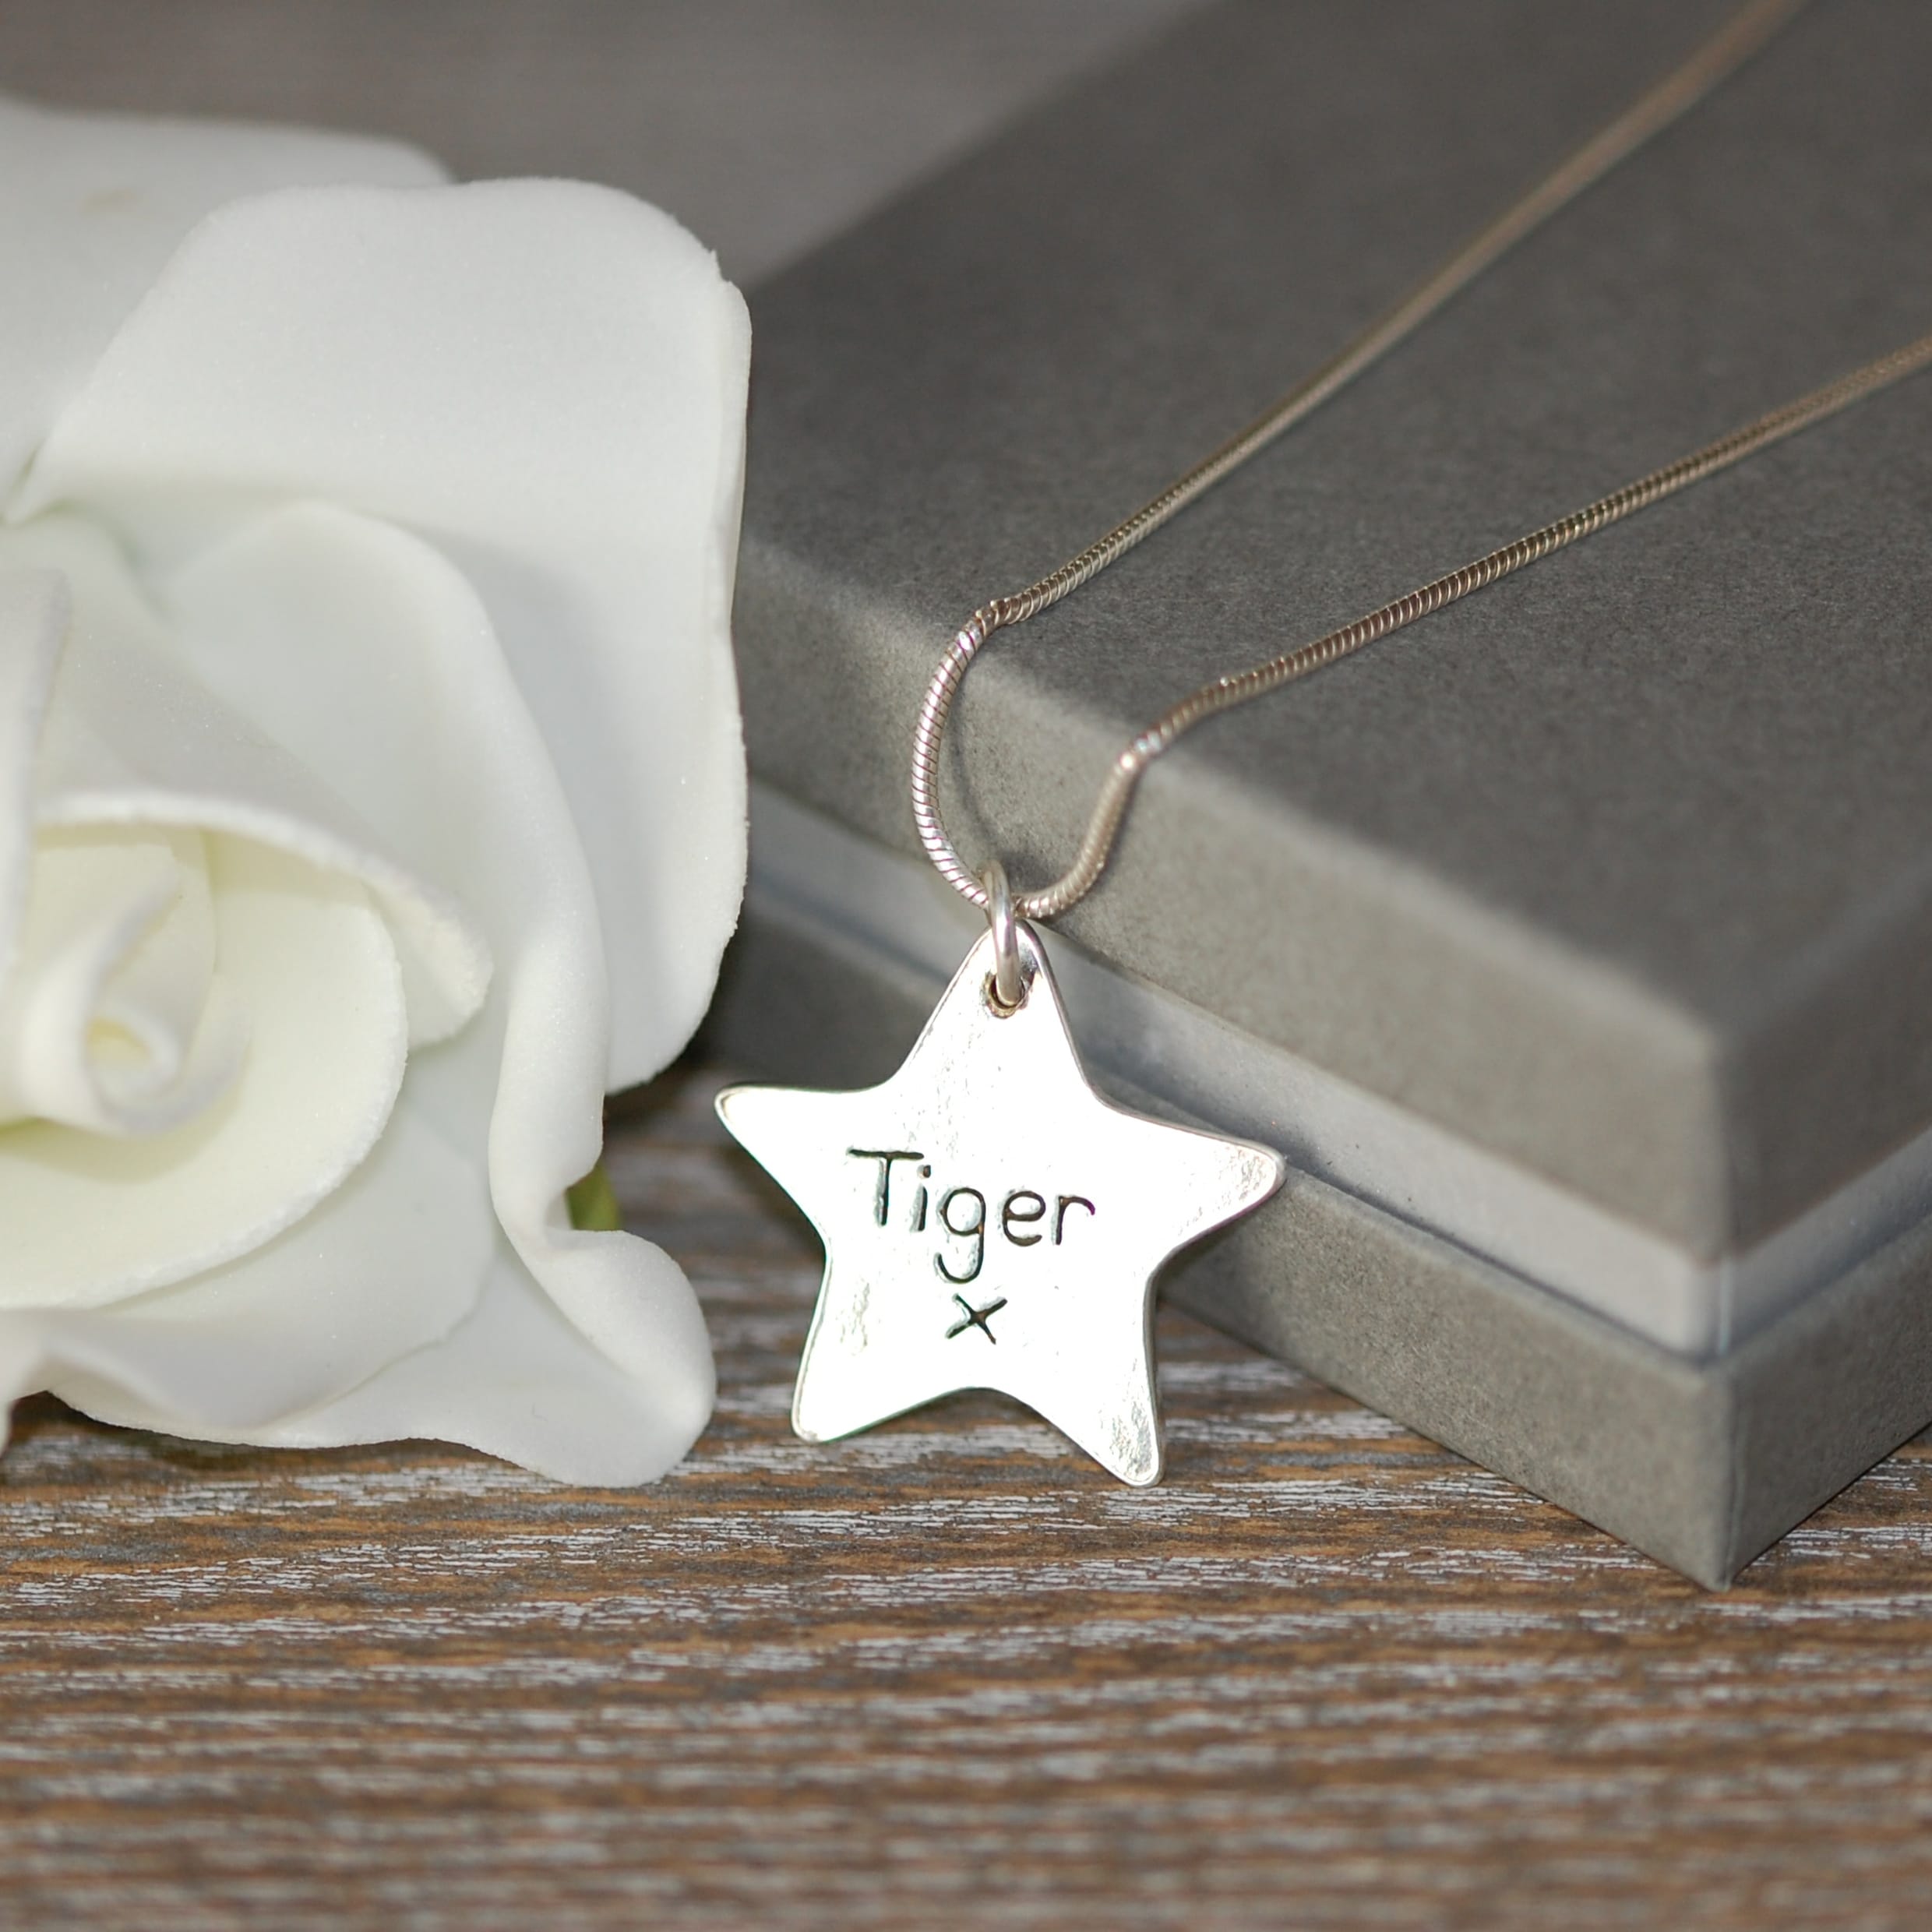 Inscription on the back of raised paw print charm